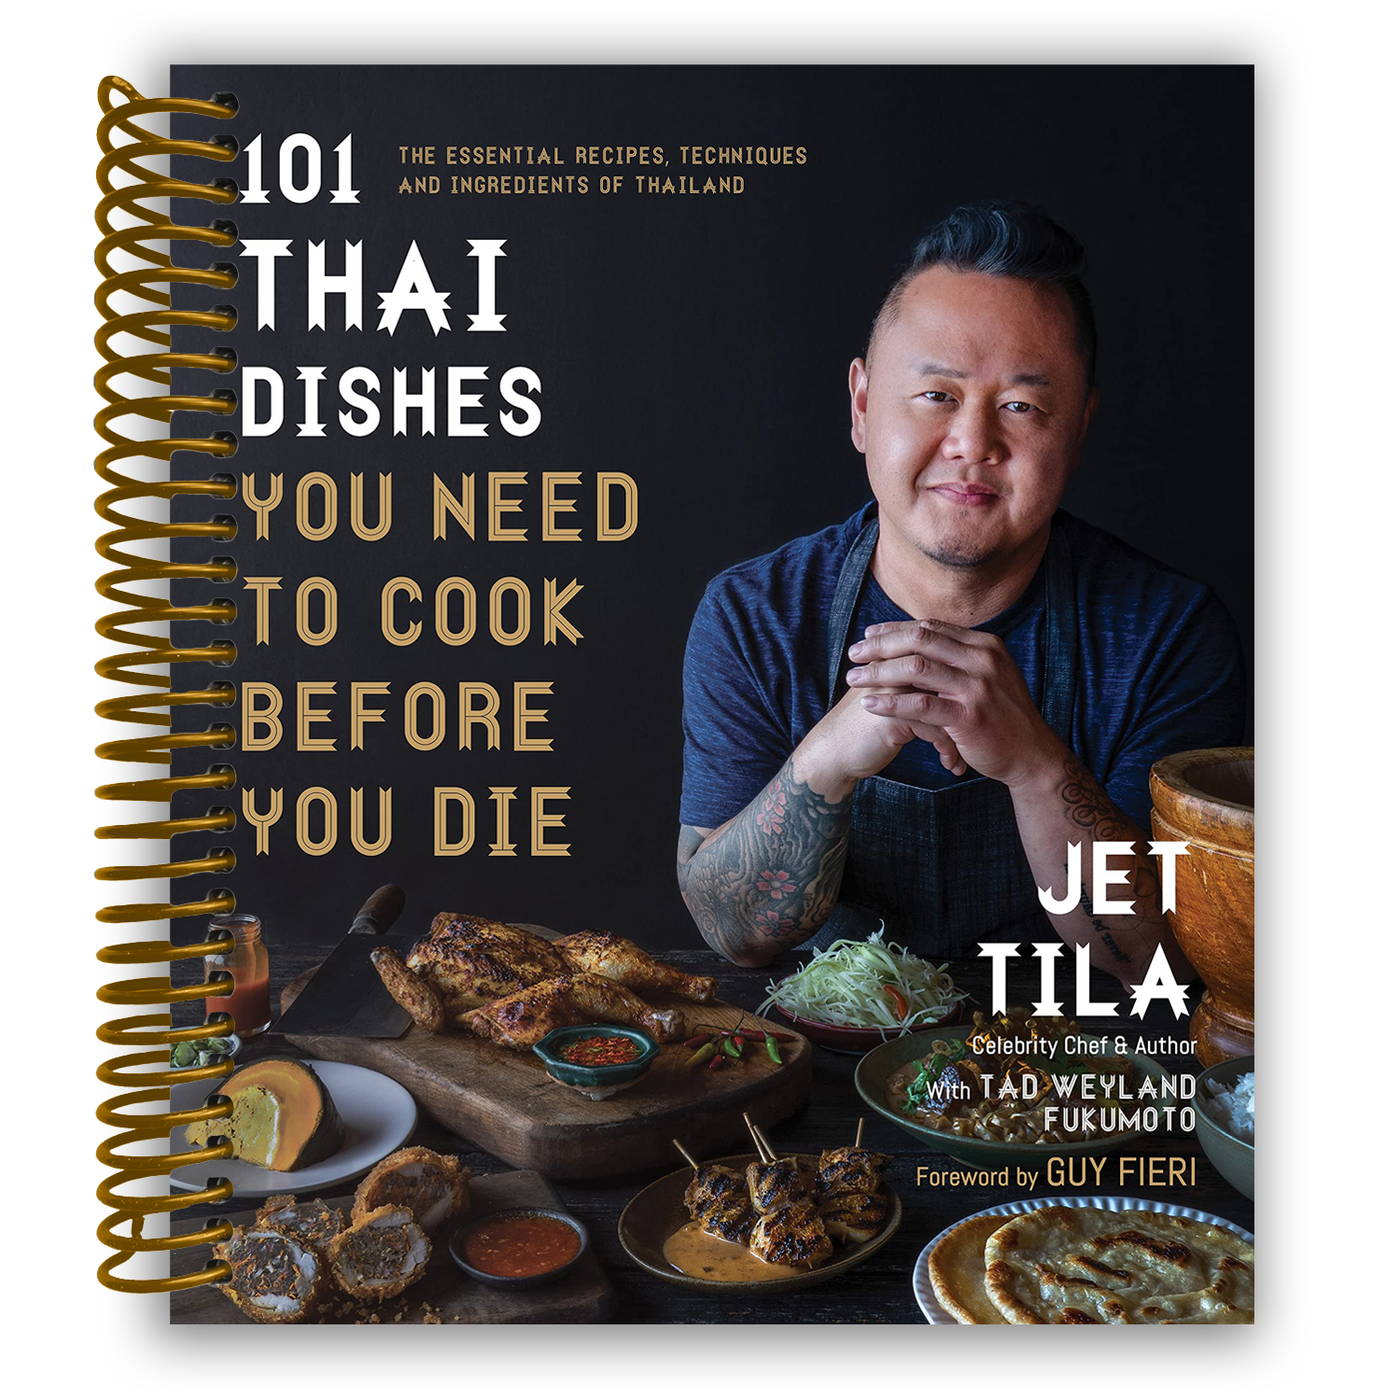 Front Cover of 101 Thai Dishes You Need to Cook Before You Die: The Essential Recipes, Techniques and Ingredients of Thailand